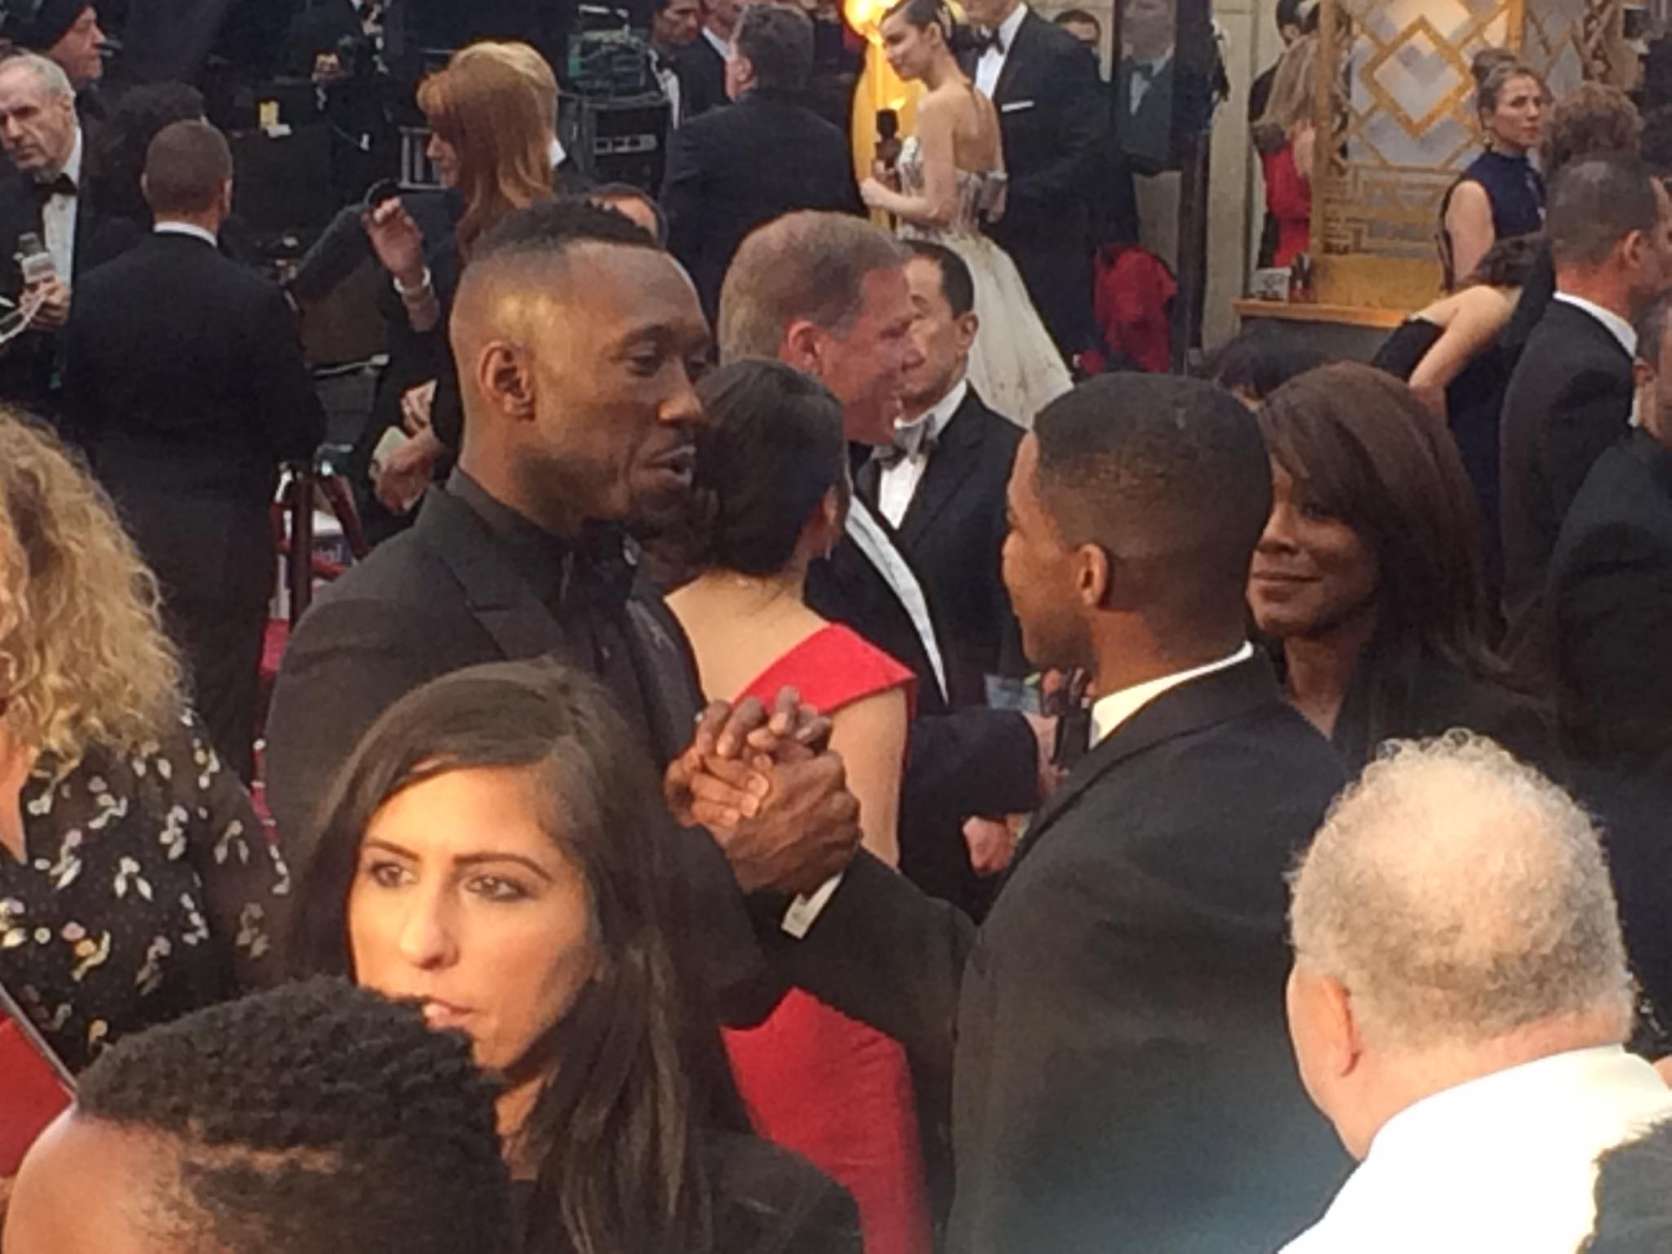 The casts of "Moonlight" and "Fences" meet on the red carpet. (WTOP/Jason Fraley)